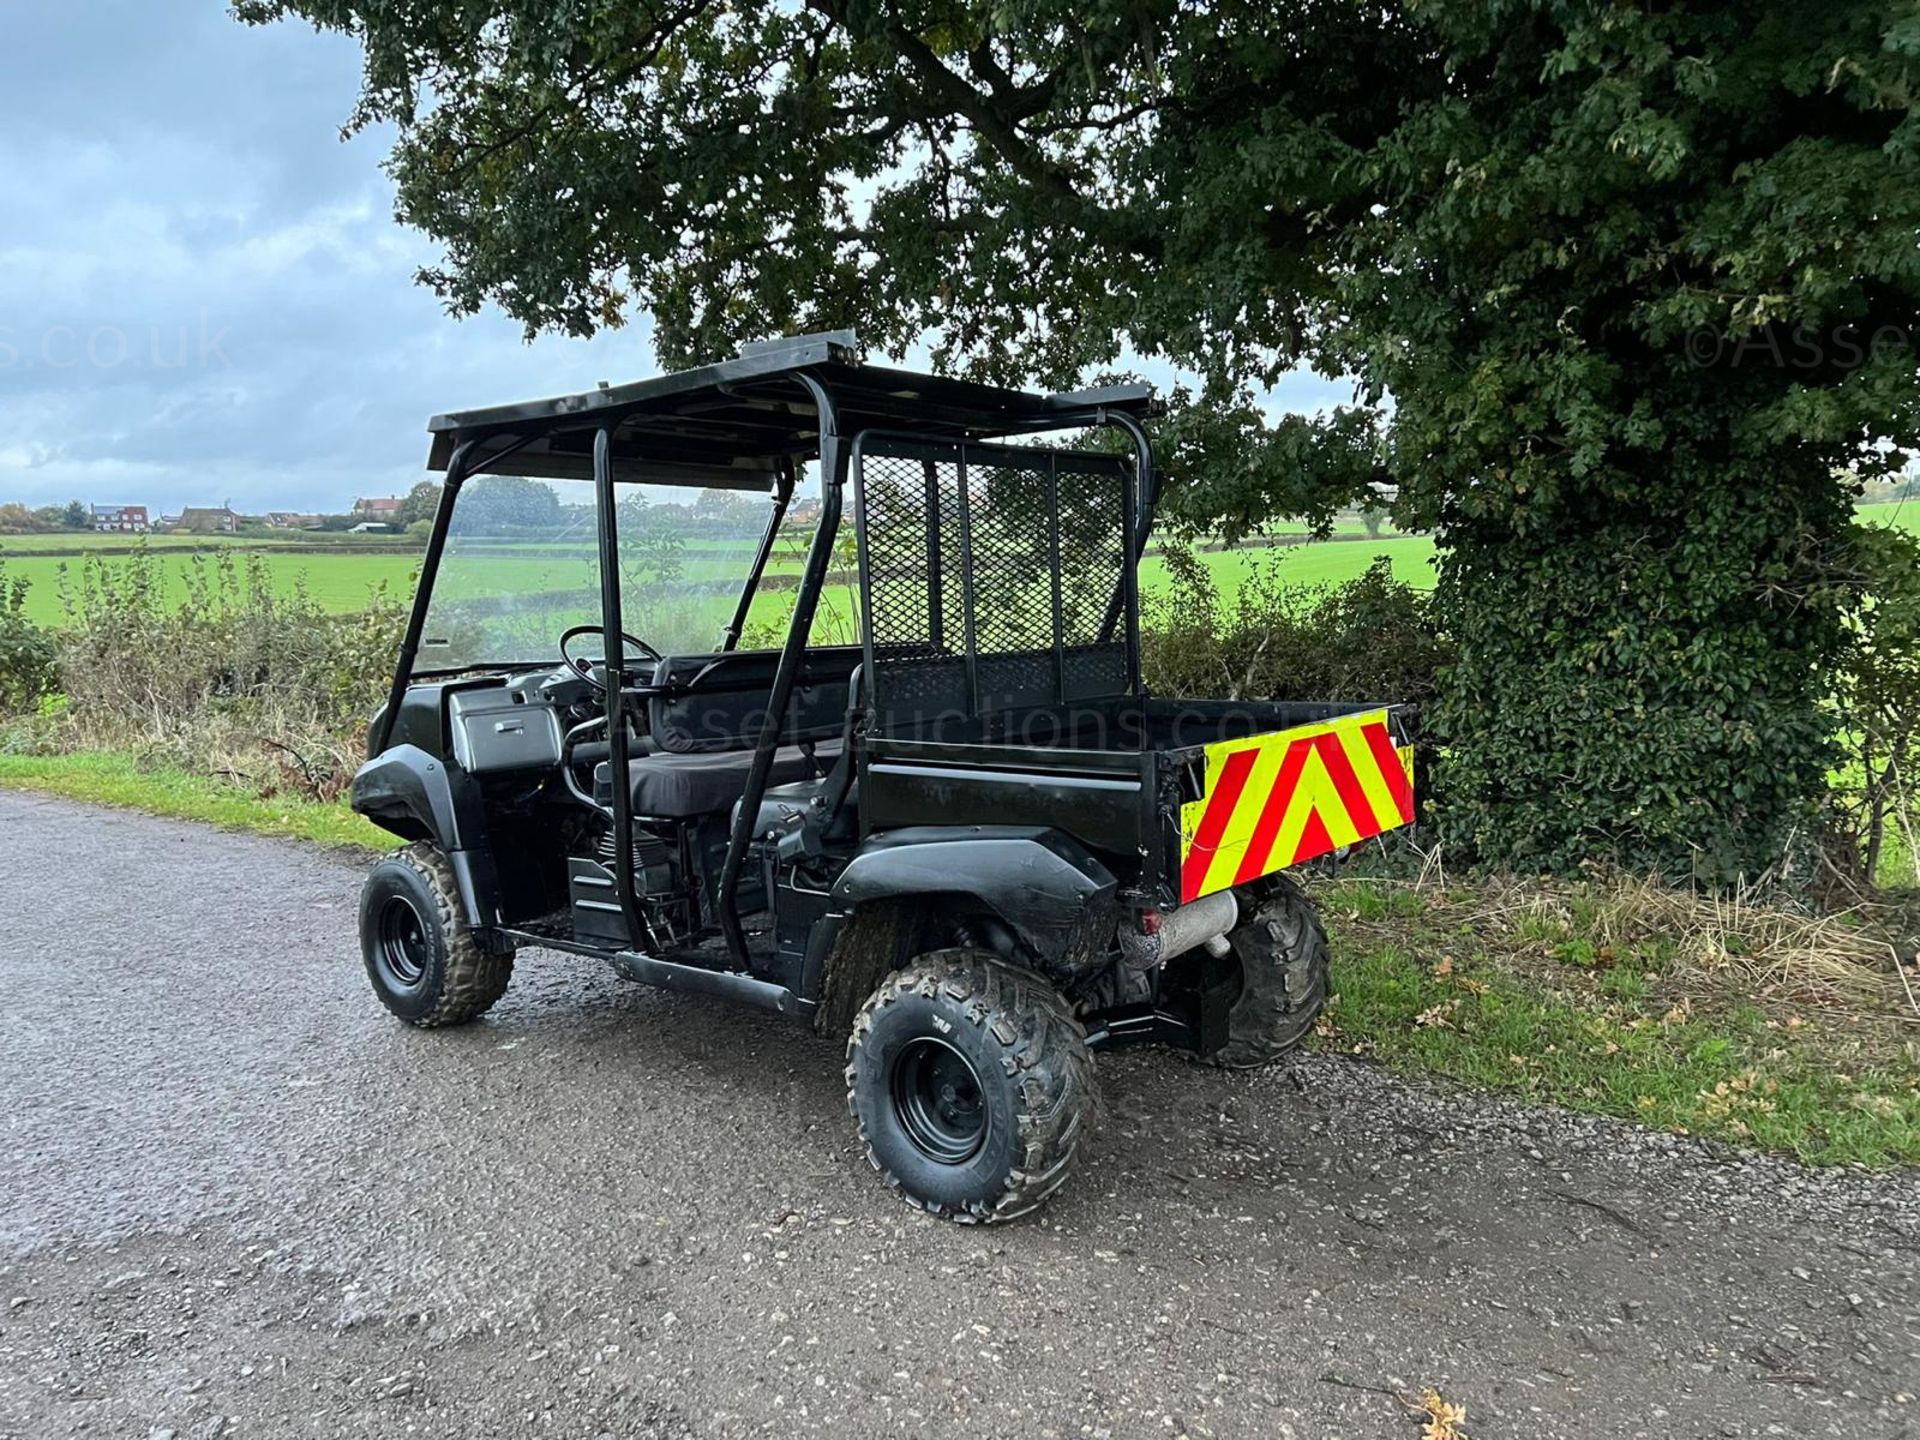 2011 KAWASAKI MULE 4010 4WD DIESEL BUGGI, RUNS AND DRIVES, SHOWING A LOW 2038 HOURS *PLUS VAT* - Image 5 of 19